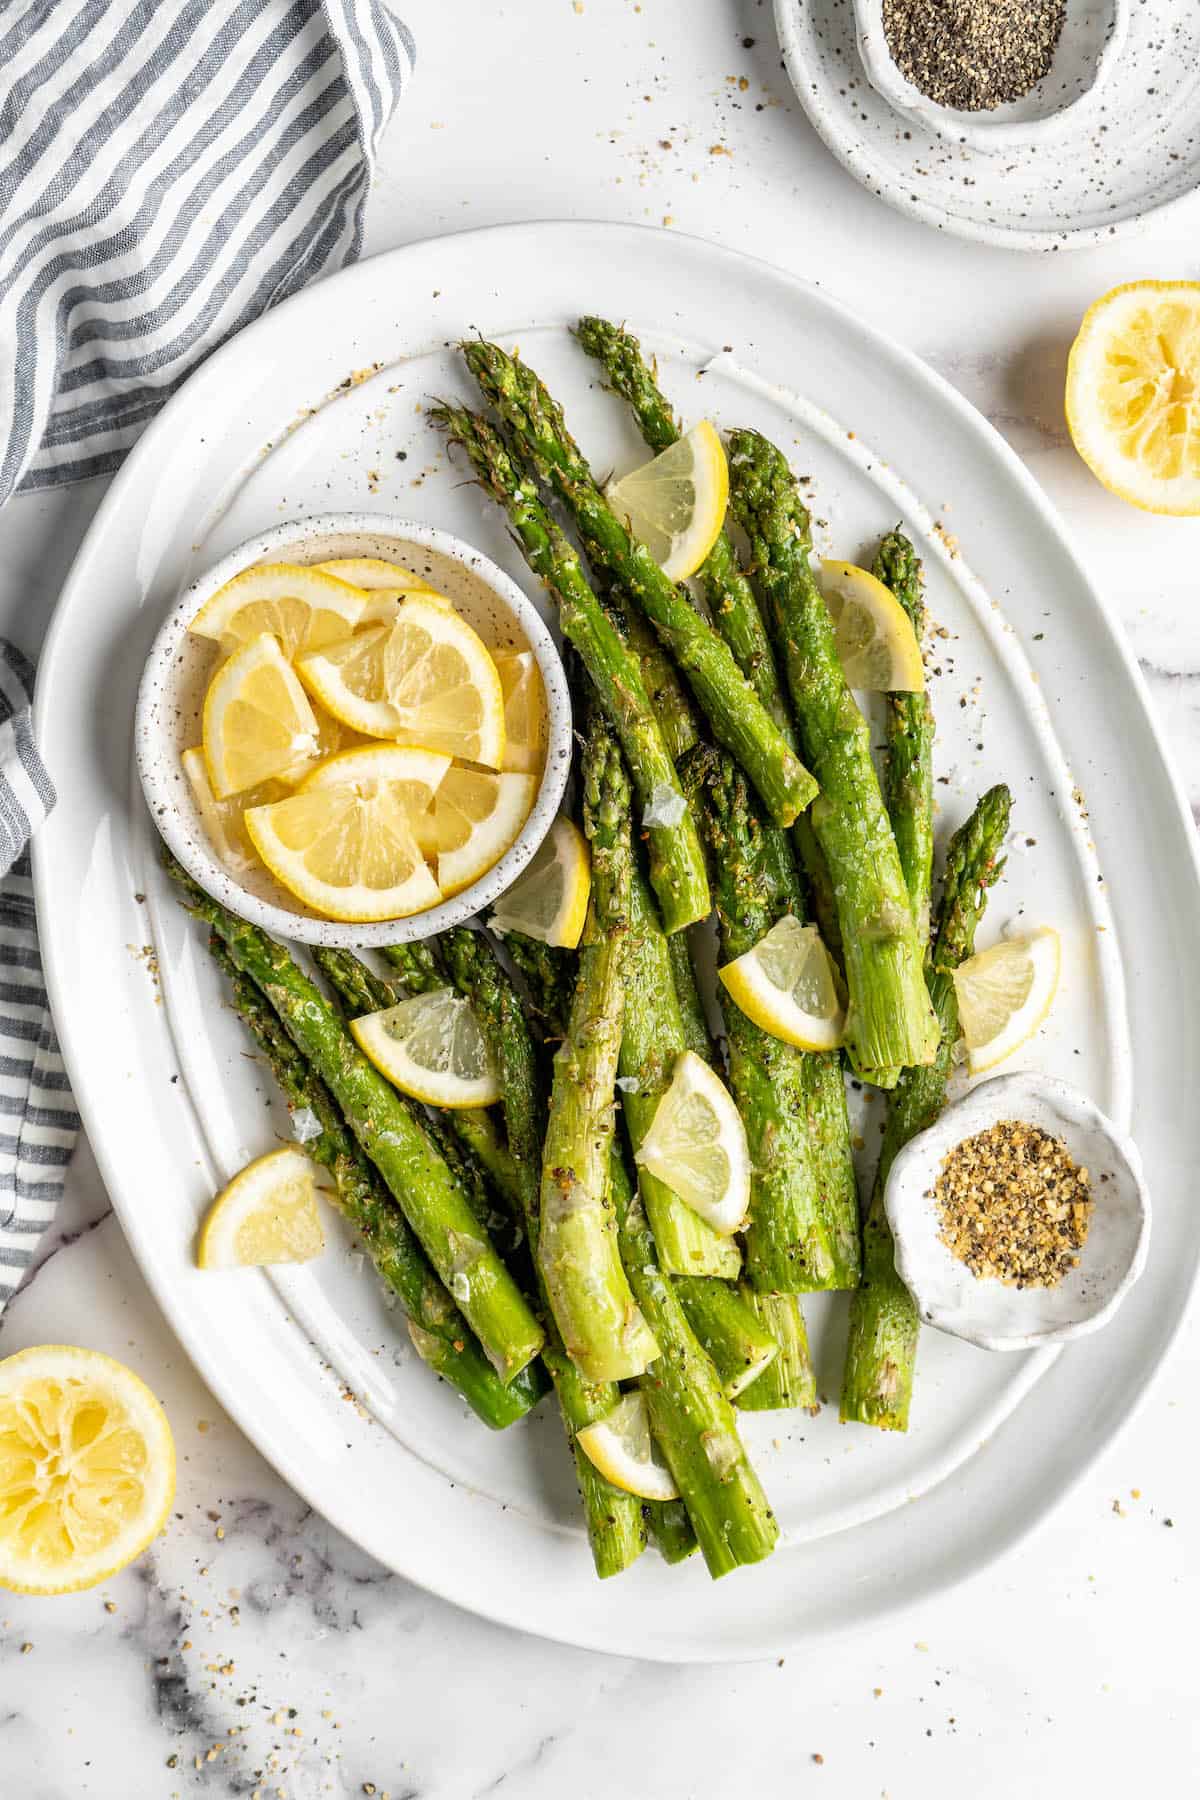 Overhead view of air fryer asparagus on platter with bowl of lemon wedges